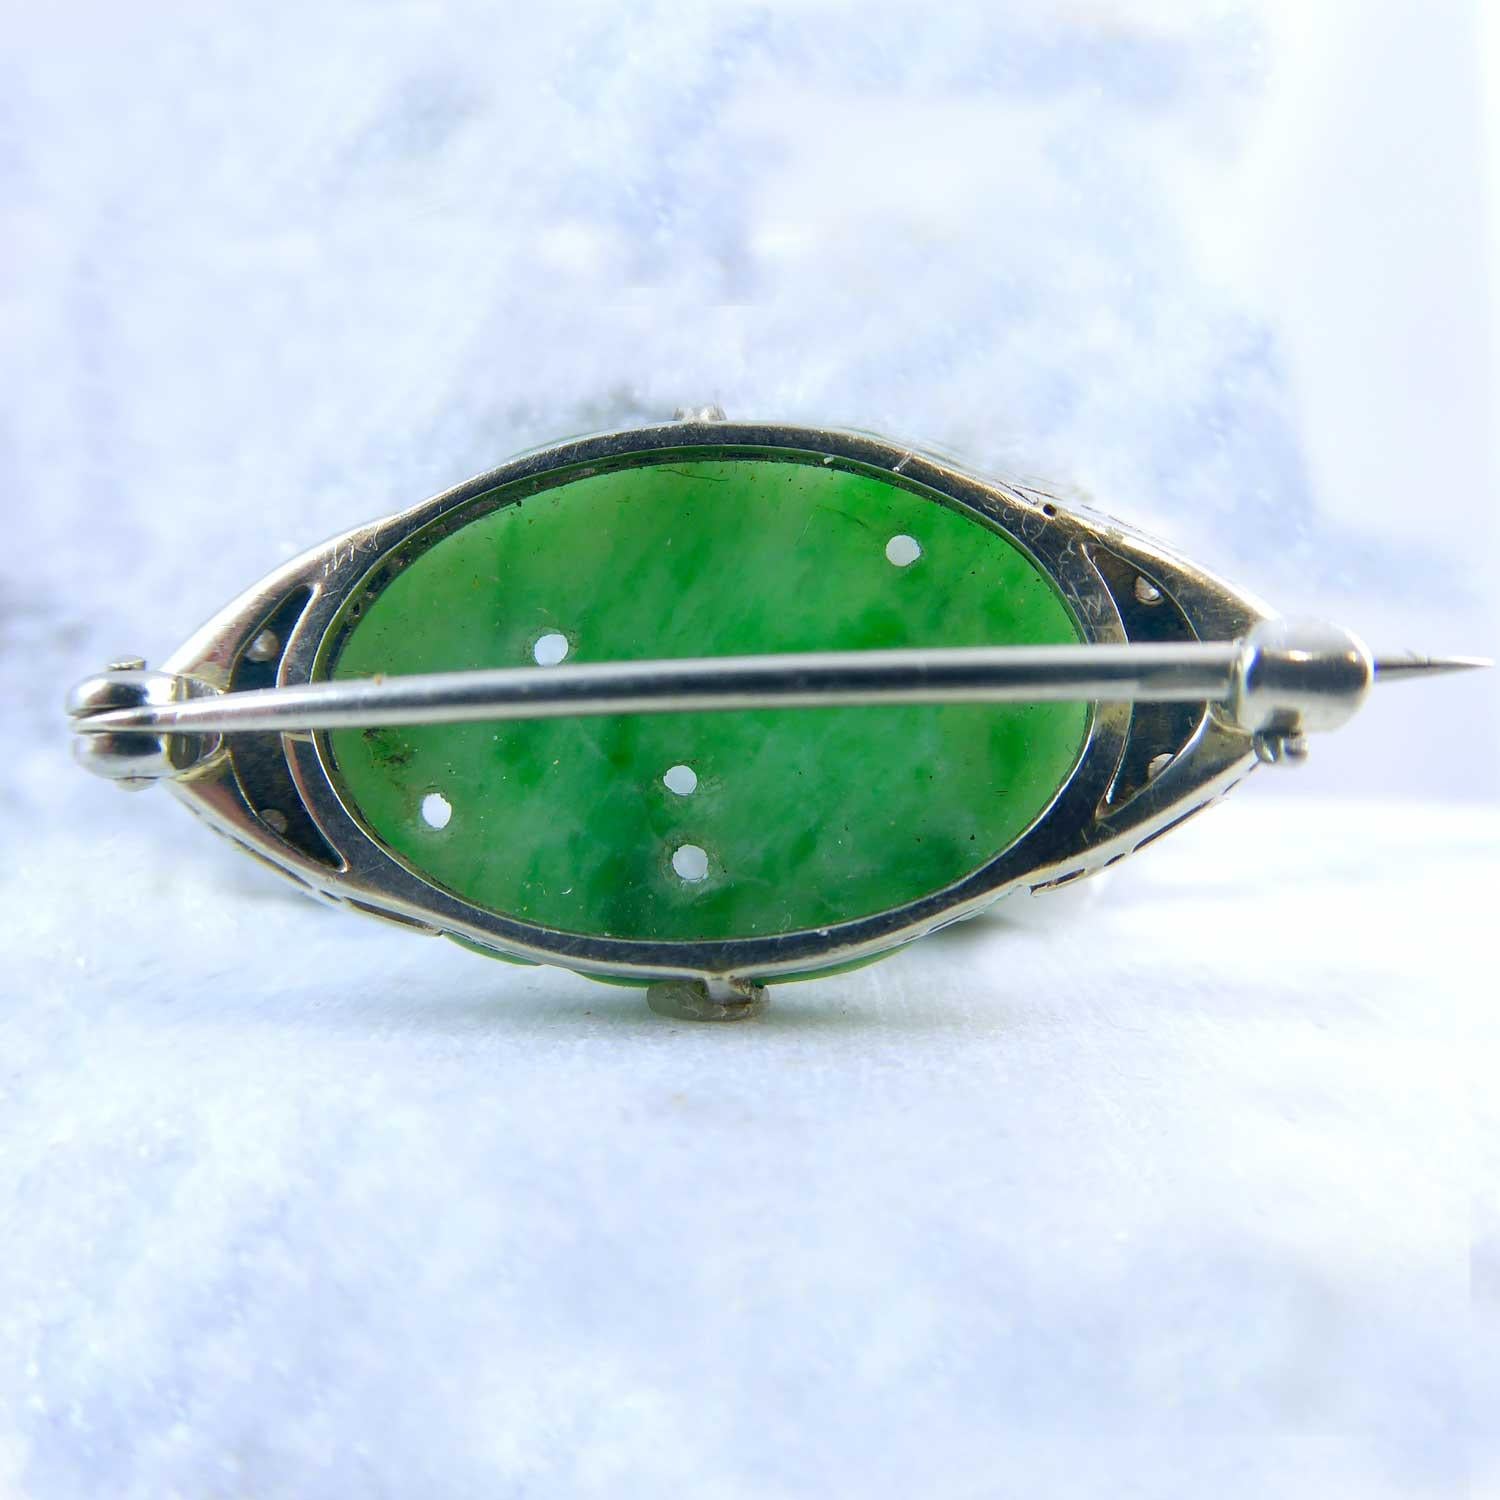 Antique Brooch Carved Jadeite and Old Cut Diamonds, Midcentury Art Deco Style 1